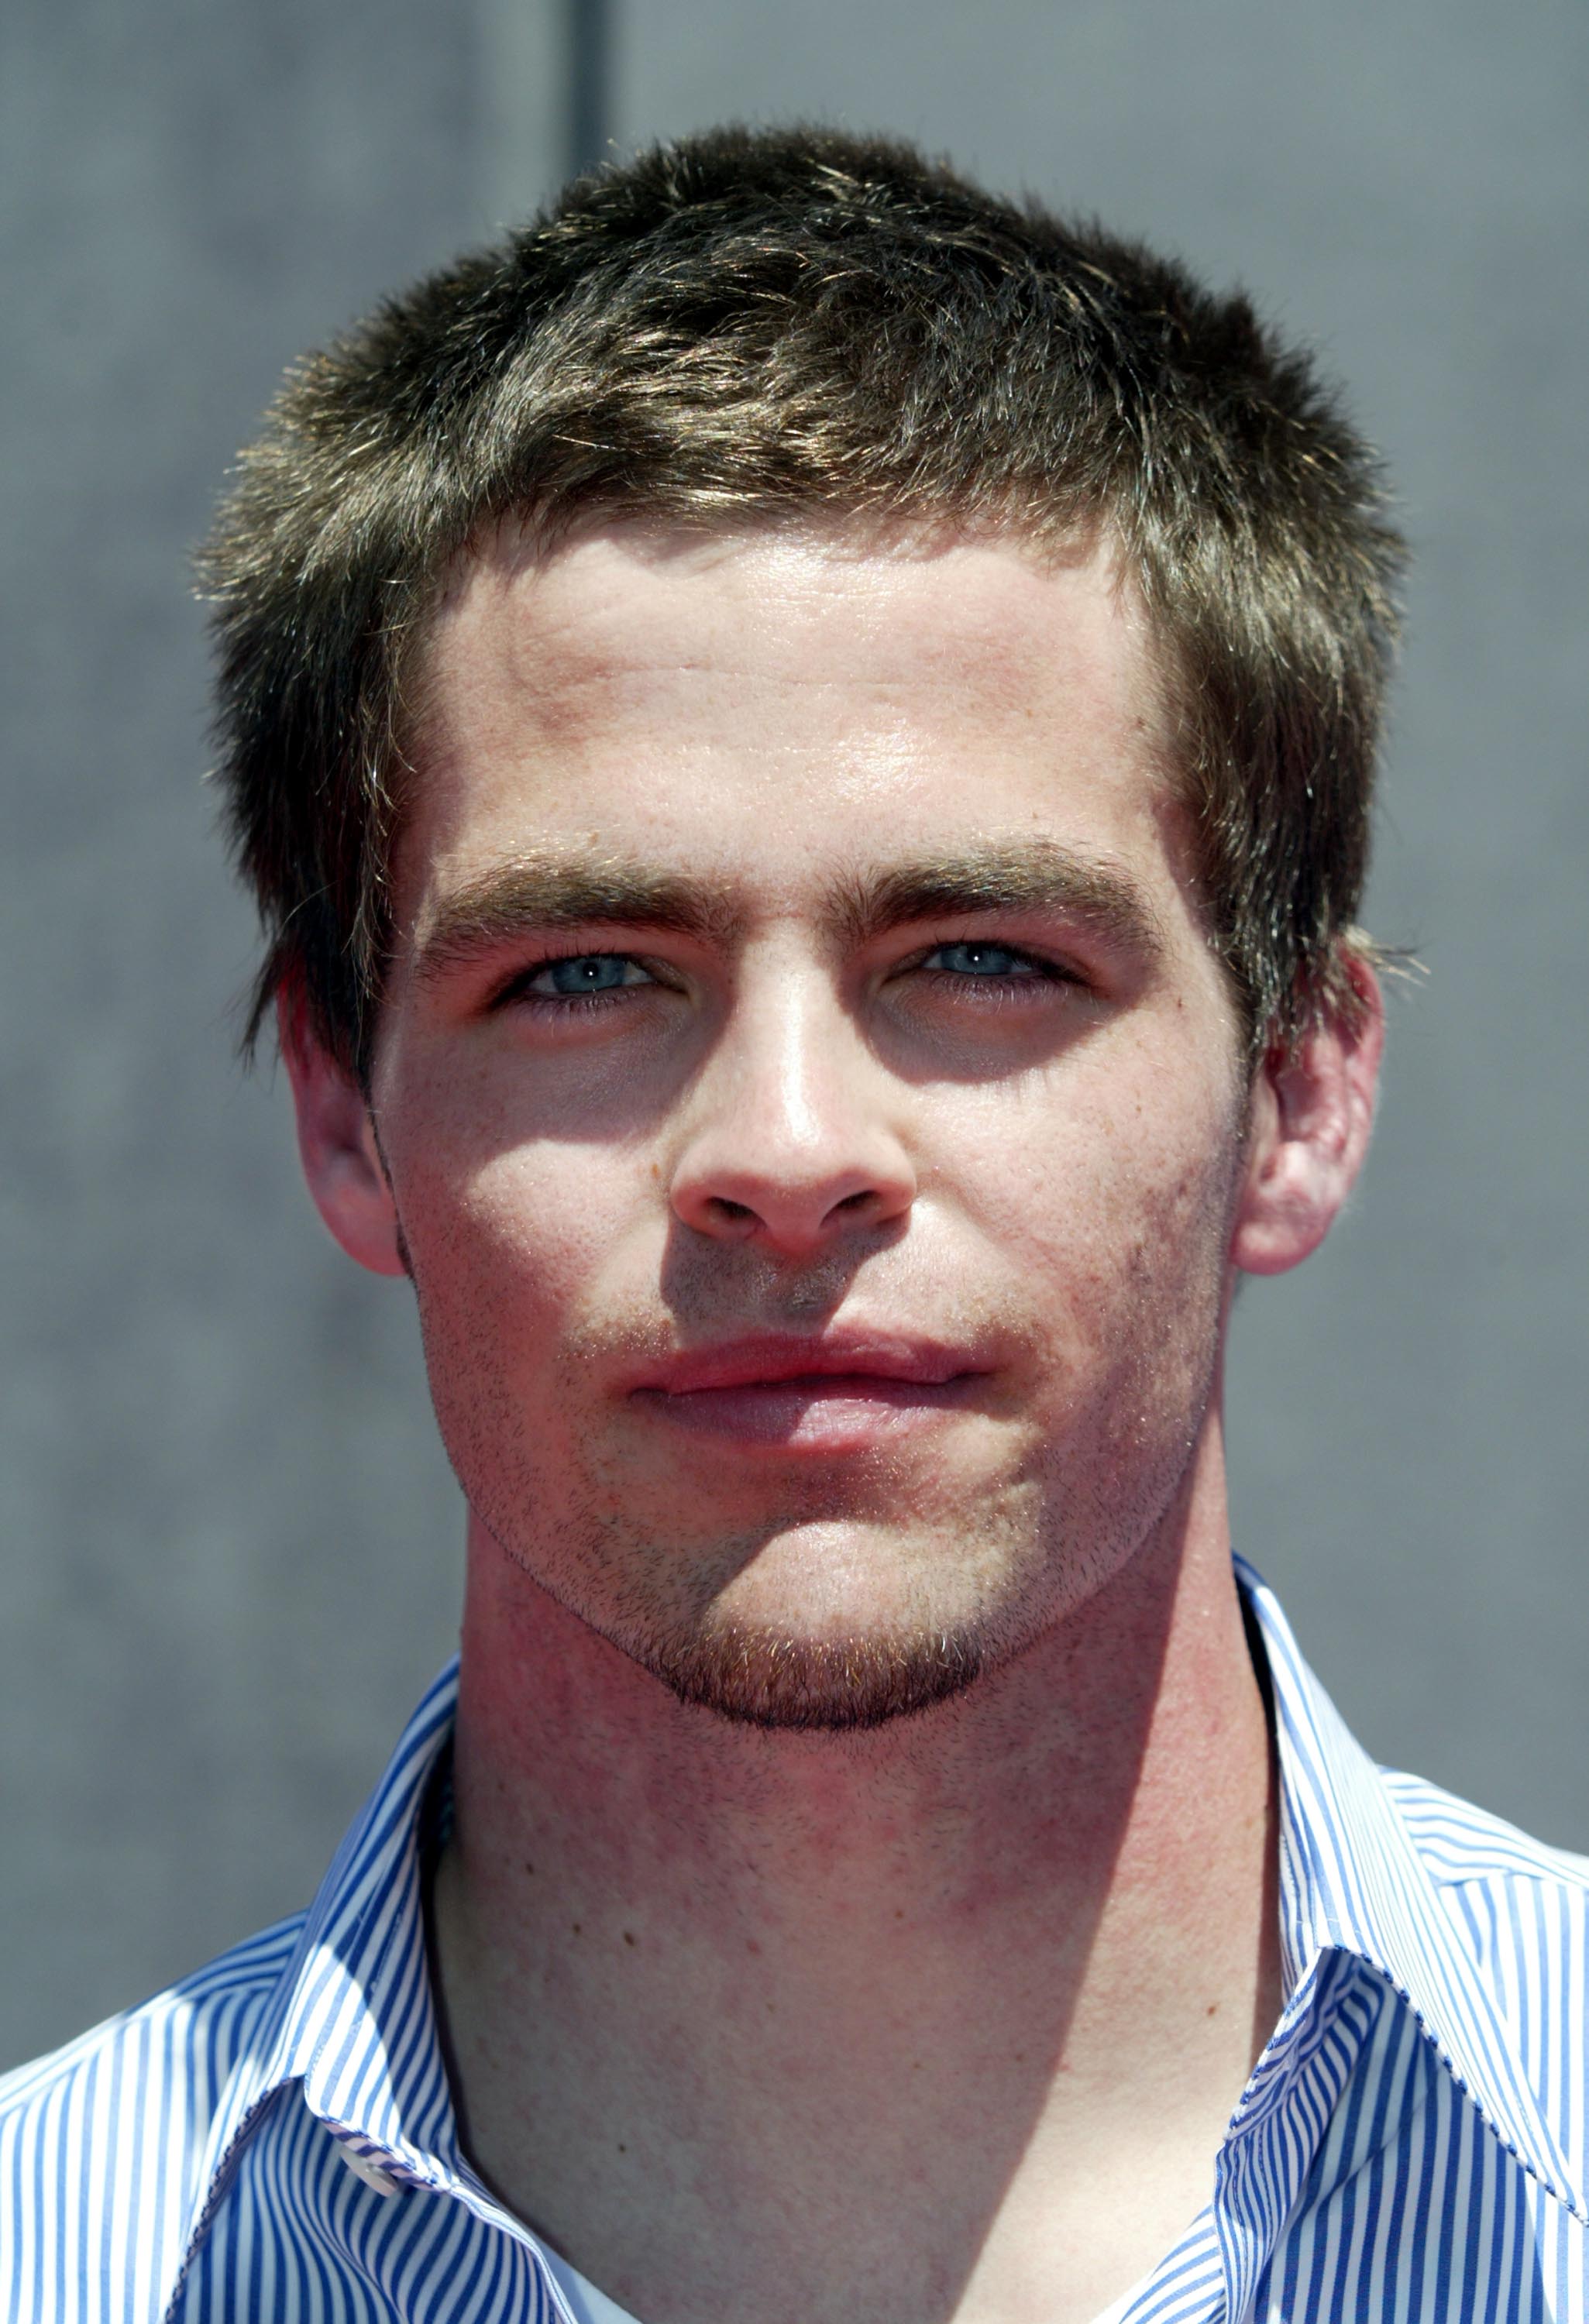 Chris Pine at the premiere "The Princess Diaries 2: Royal Engagement," 2004 | Source: Getty Images